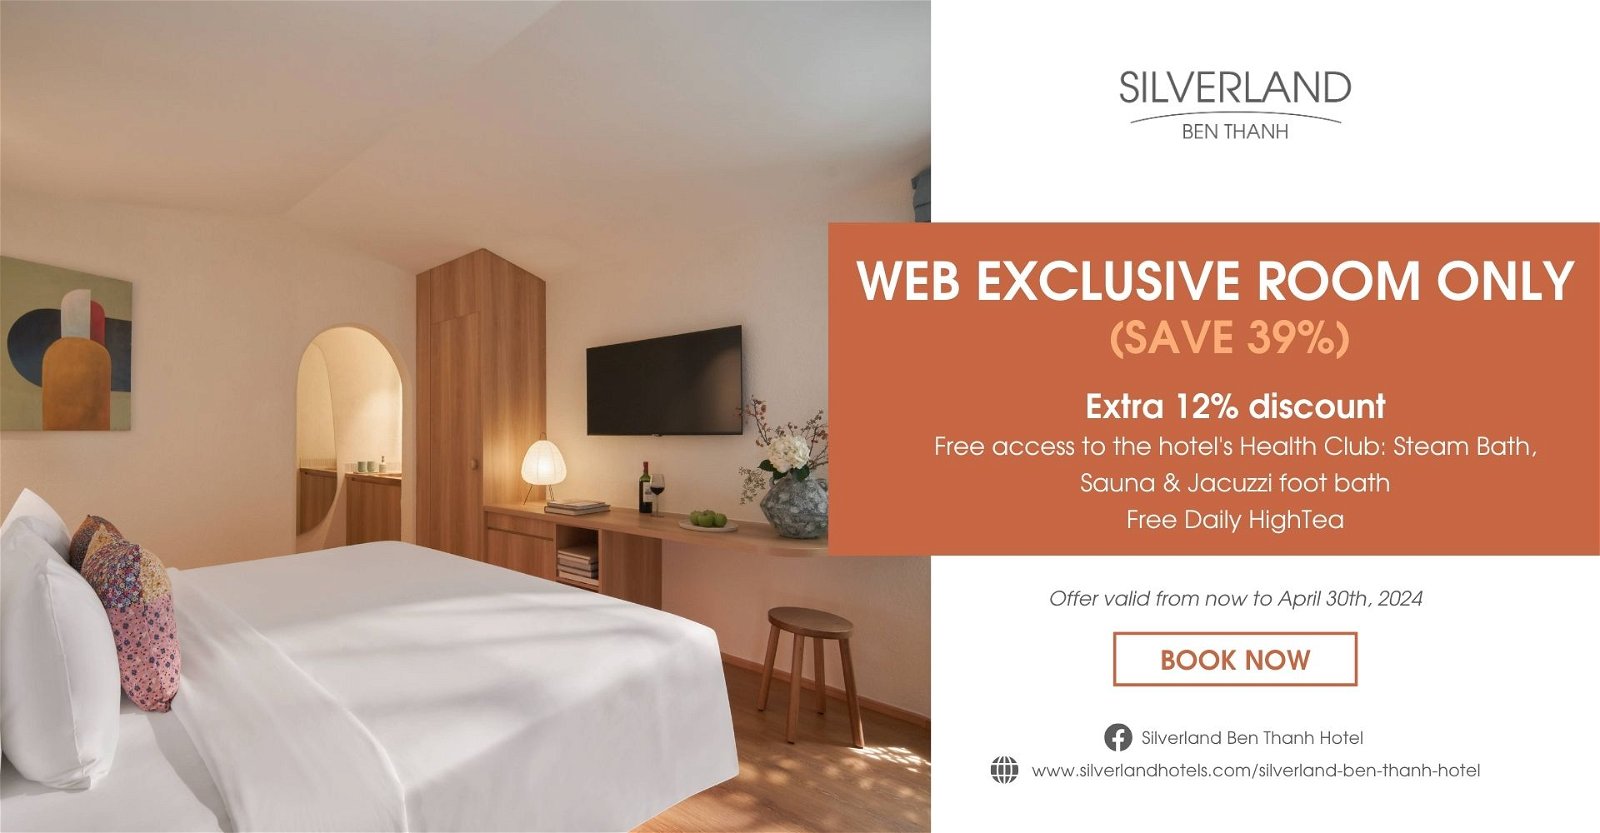 SILVERLAND BEN THANH – WEB EXCLUSIVE ROOM ONLY HOT PACKAGE (SAVE 39%)